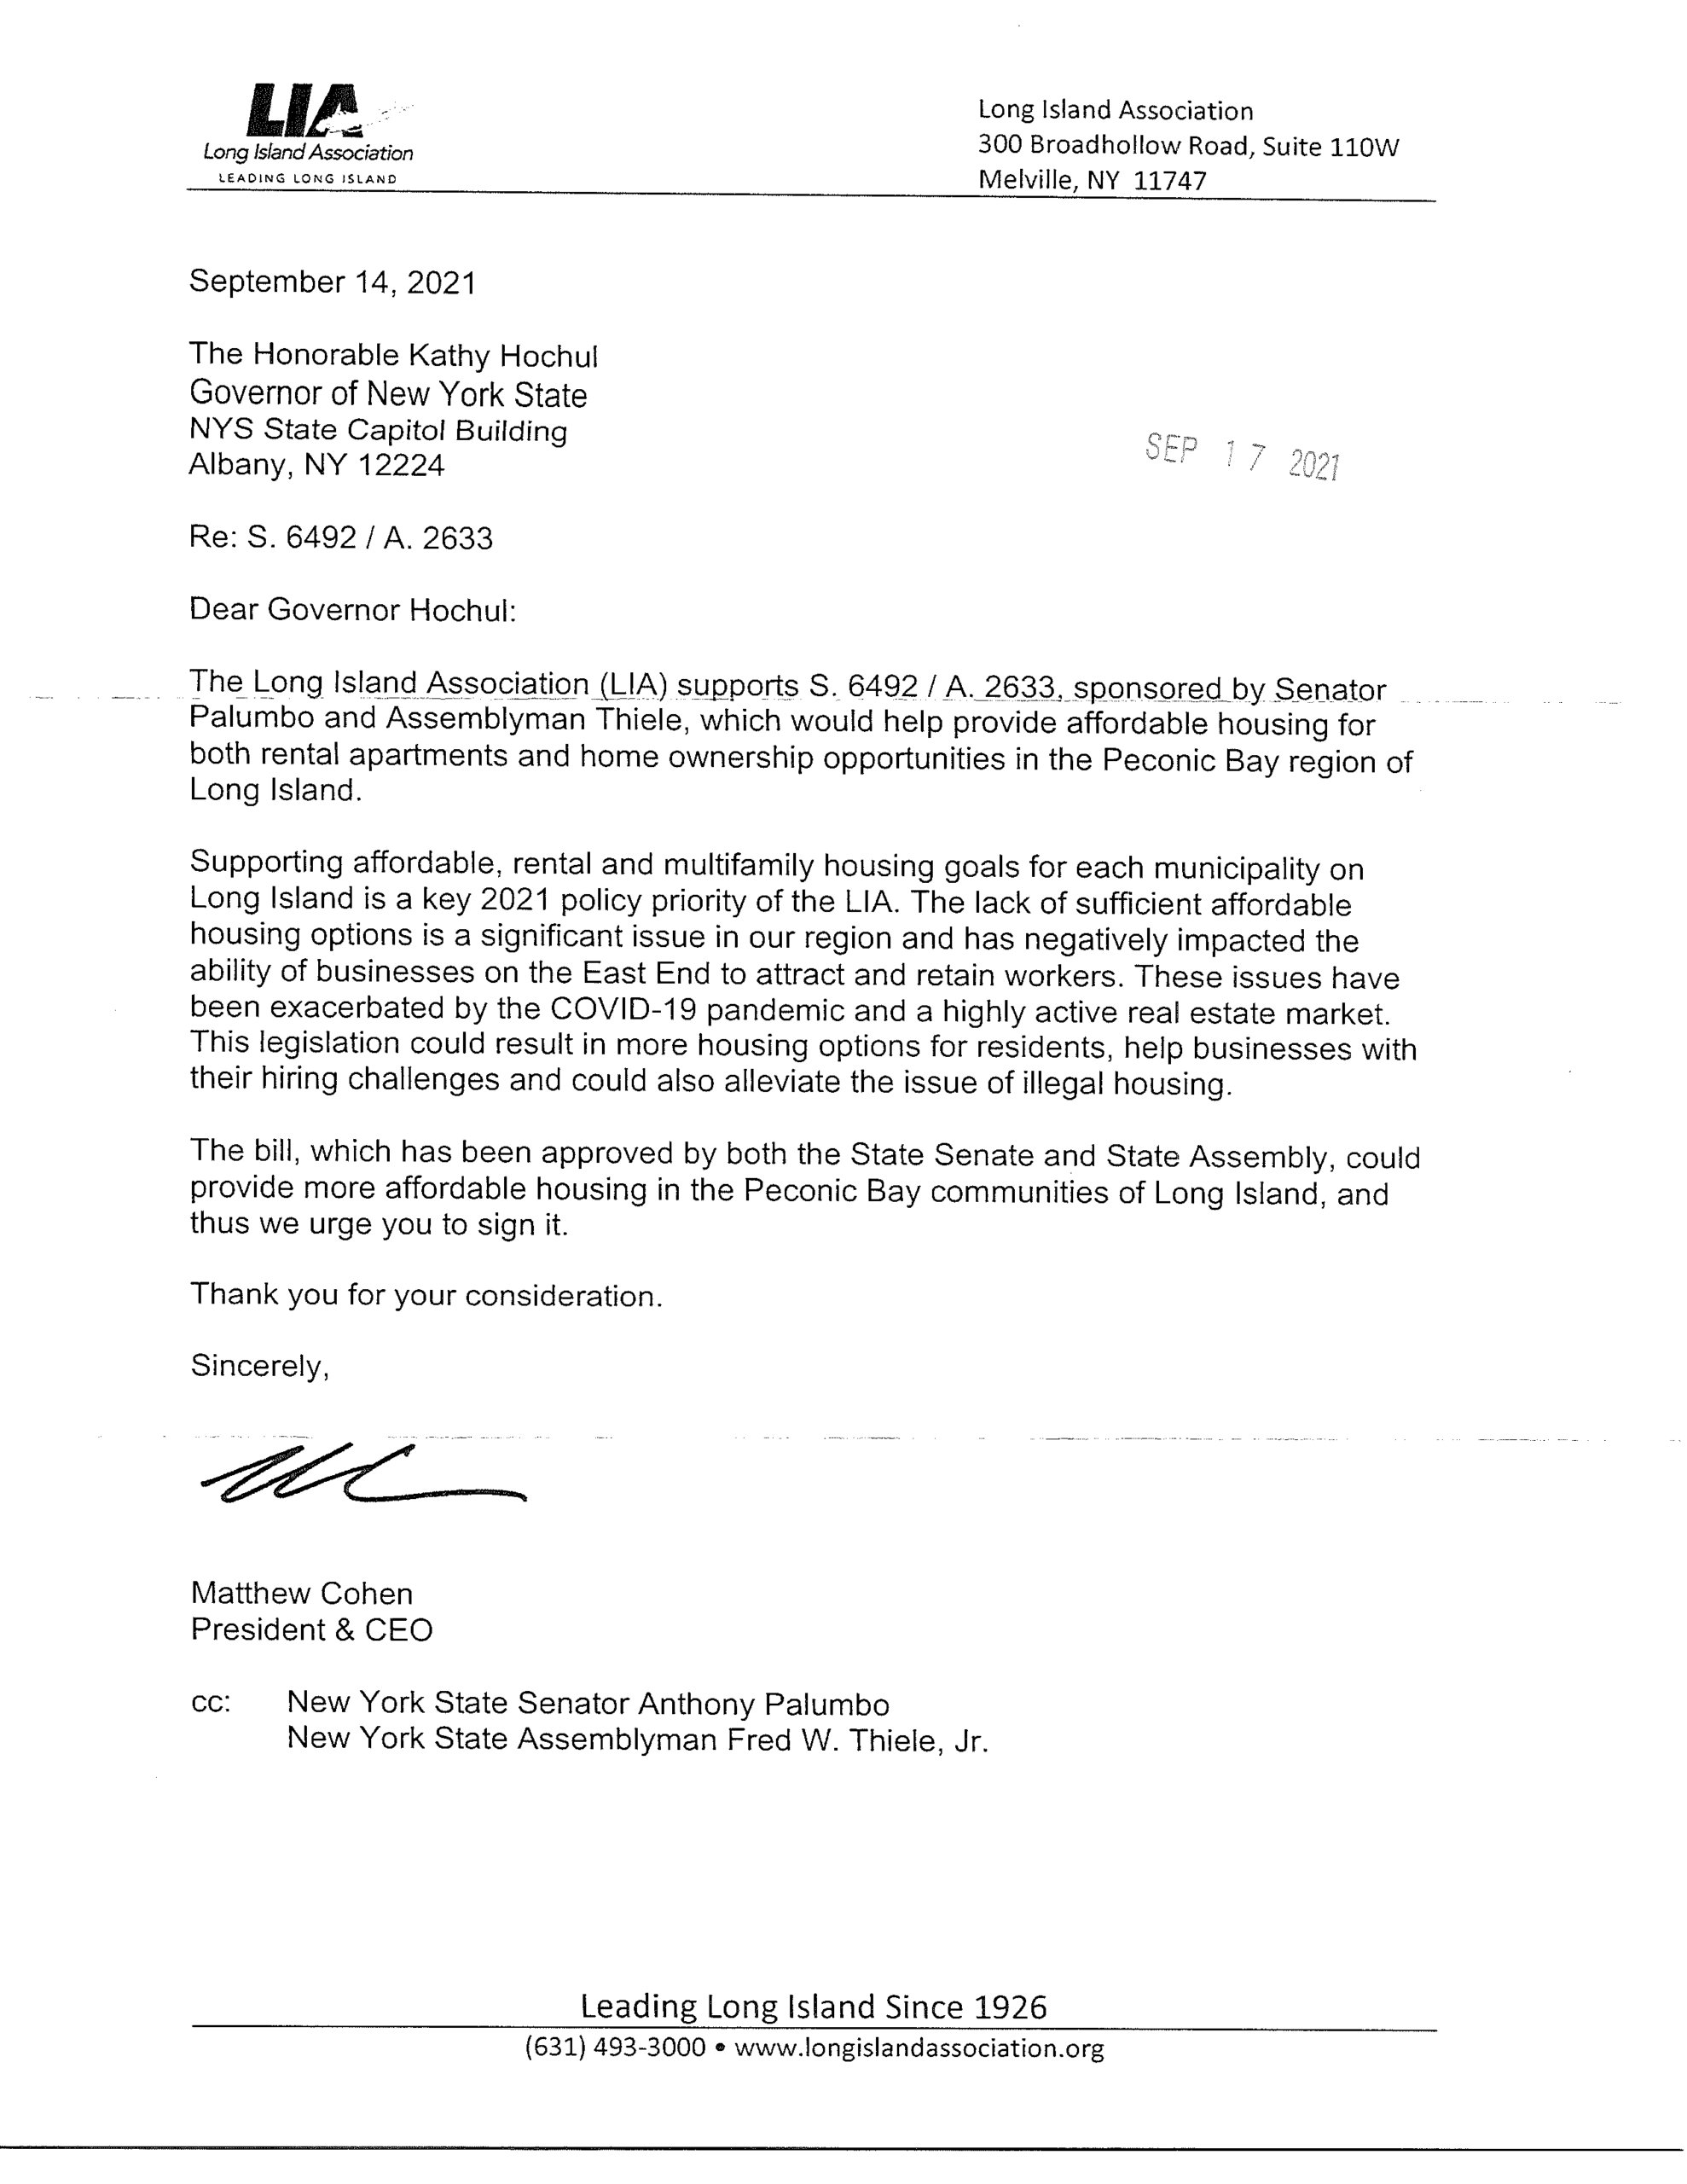 Long Island Association letter of support for Community Housing Fund to create affordable housing opportunities in the region